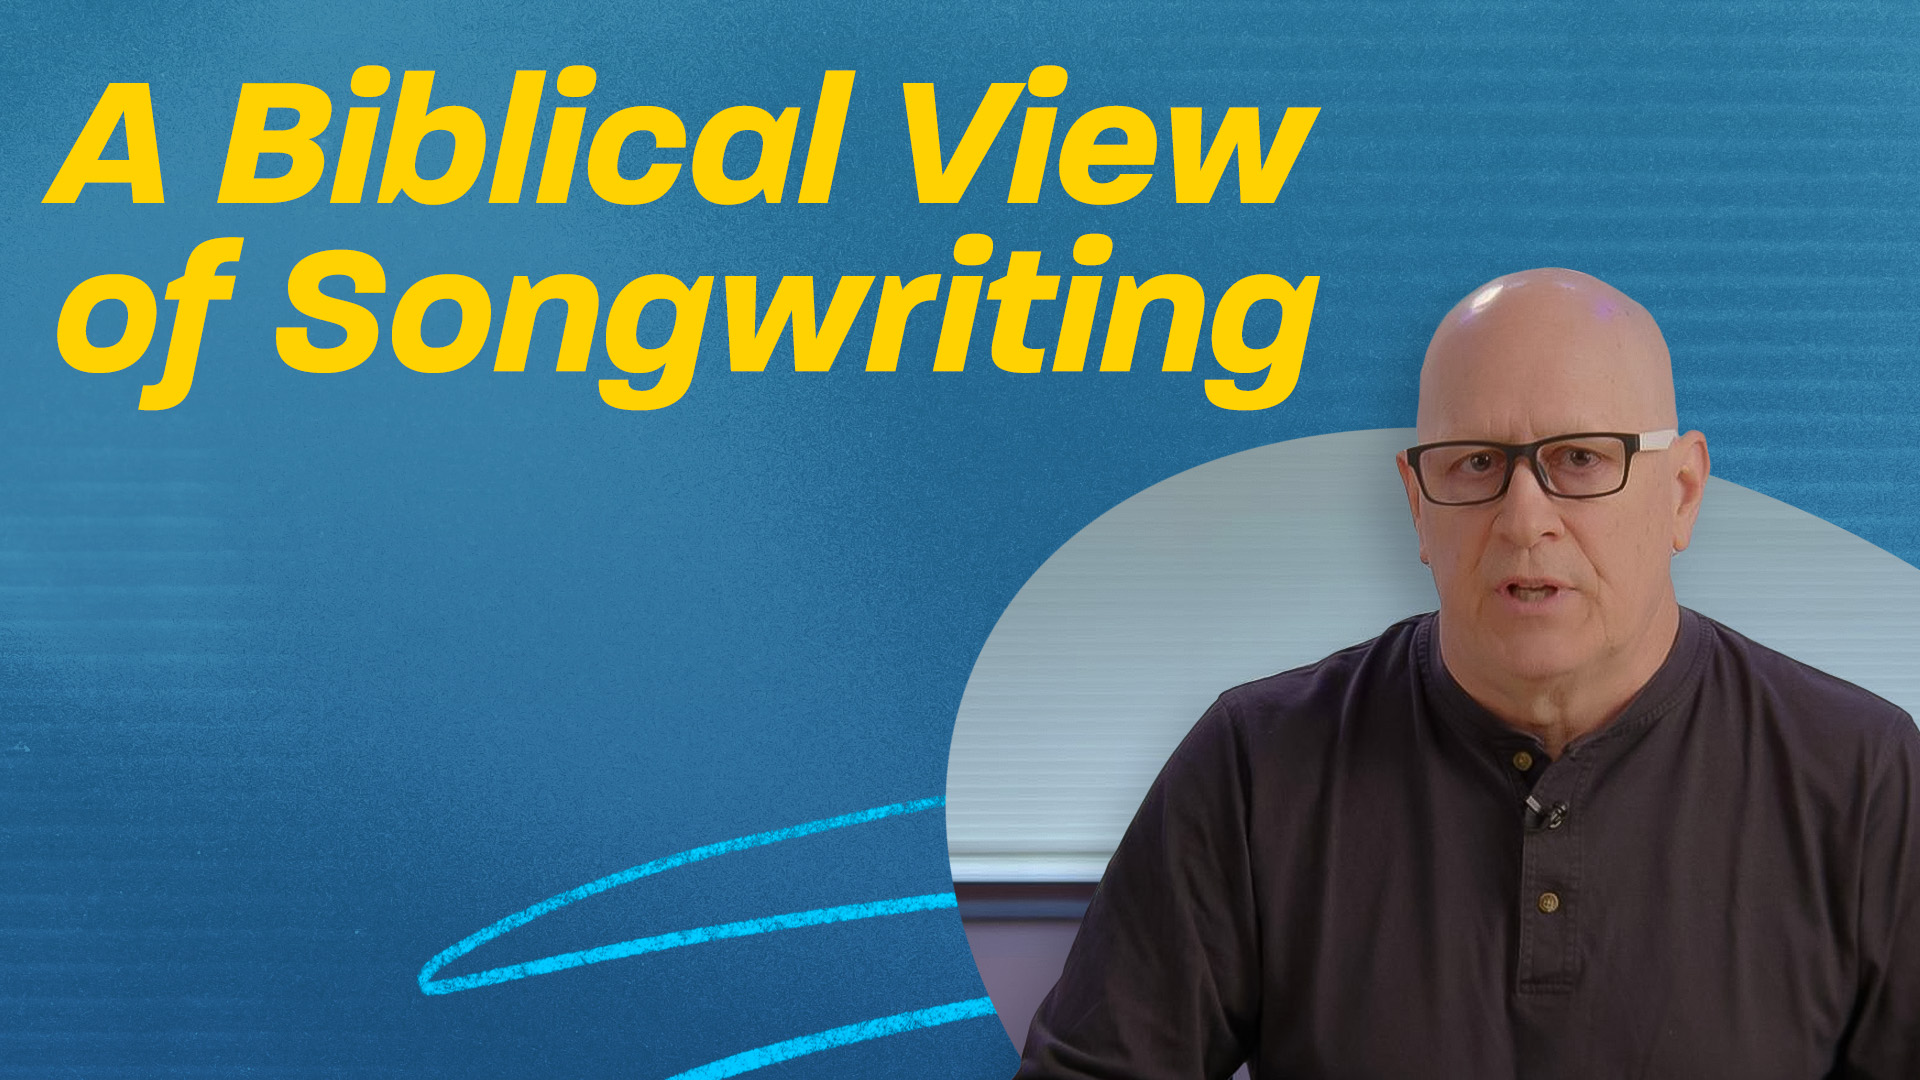 A Biblical View of Songwriting